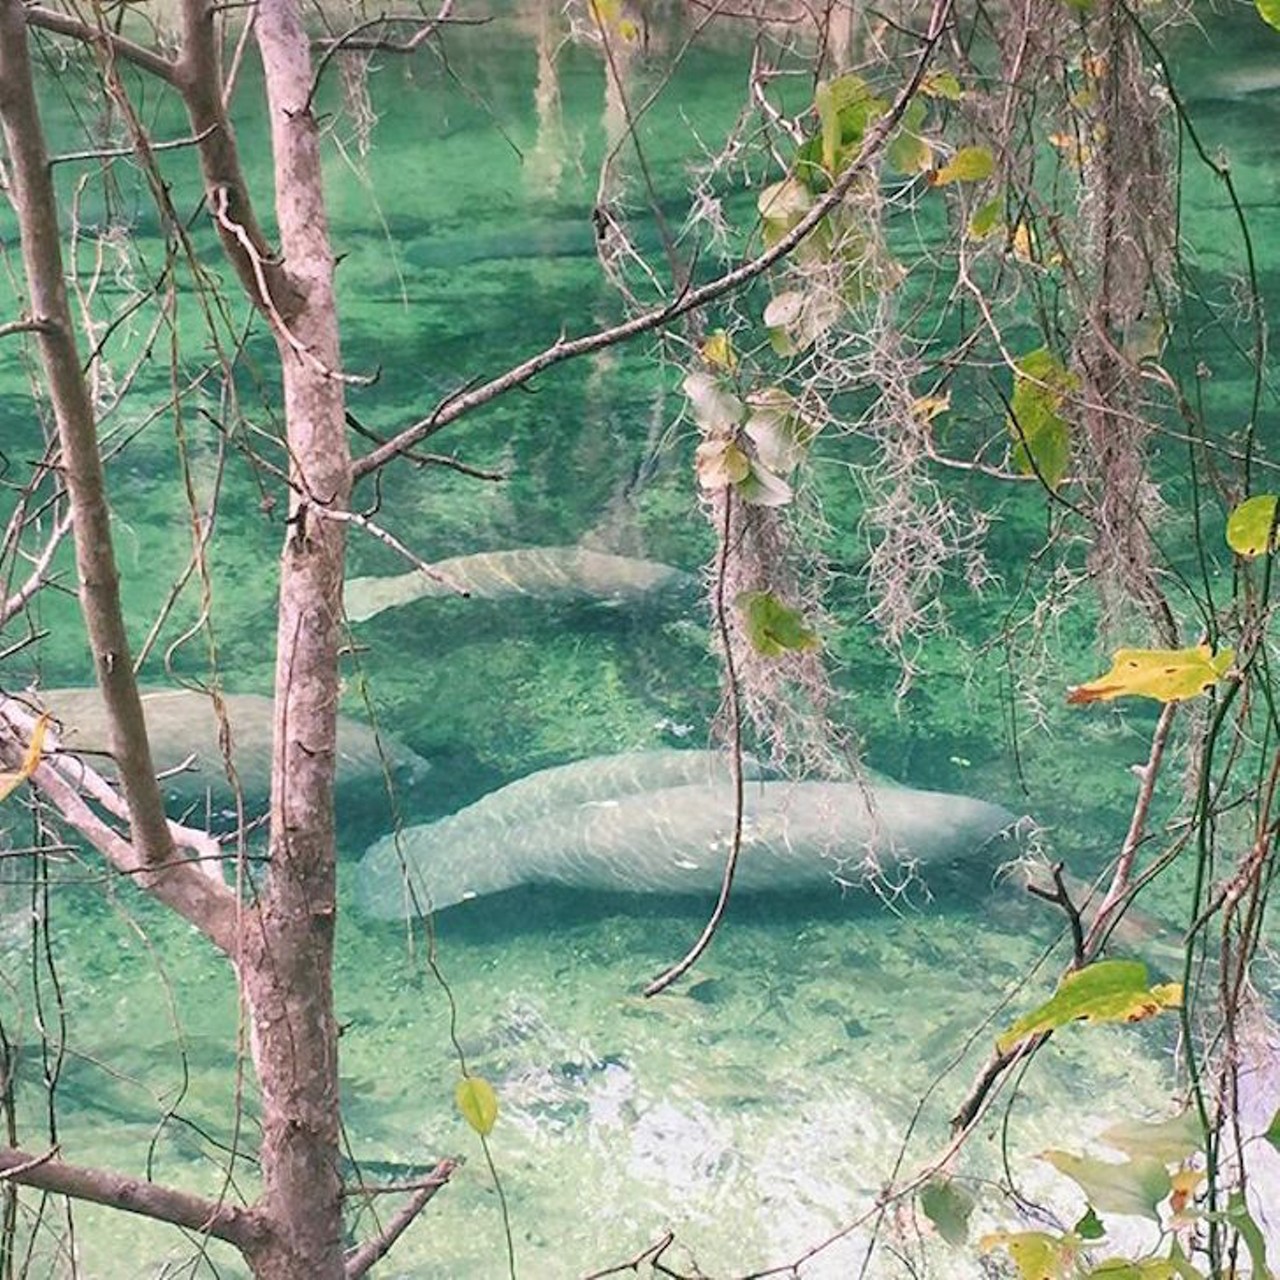 Blue Springs State Park
2100 W. French Ave., Orange City, Fla. 32763 | 386-775-3663
Florida&#146;s cutest sea mammal, the manatee, gathers by the hundreds at Blue Springs. You might not be able to swim our aquatic friends, but when you&#146;re taking a break from scuba diving in the crystal clear springs, be sure to go to the overlooks to catch a glimpse of an endangered manatee.
Photo via samimerthe on Instagram